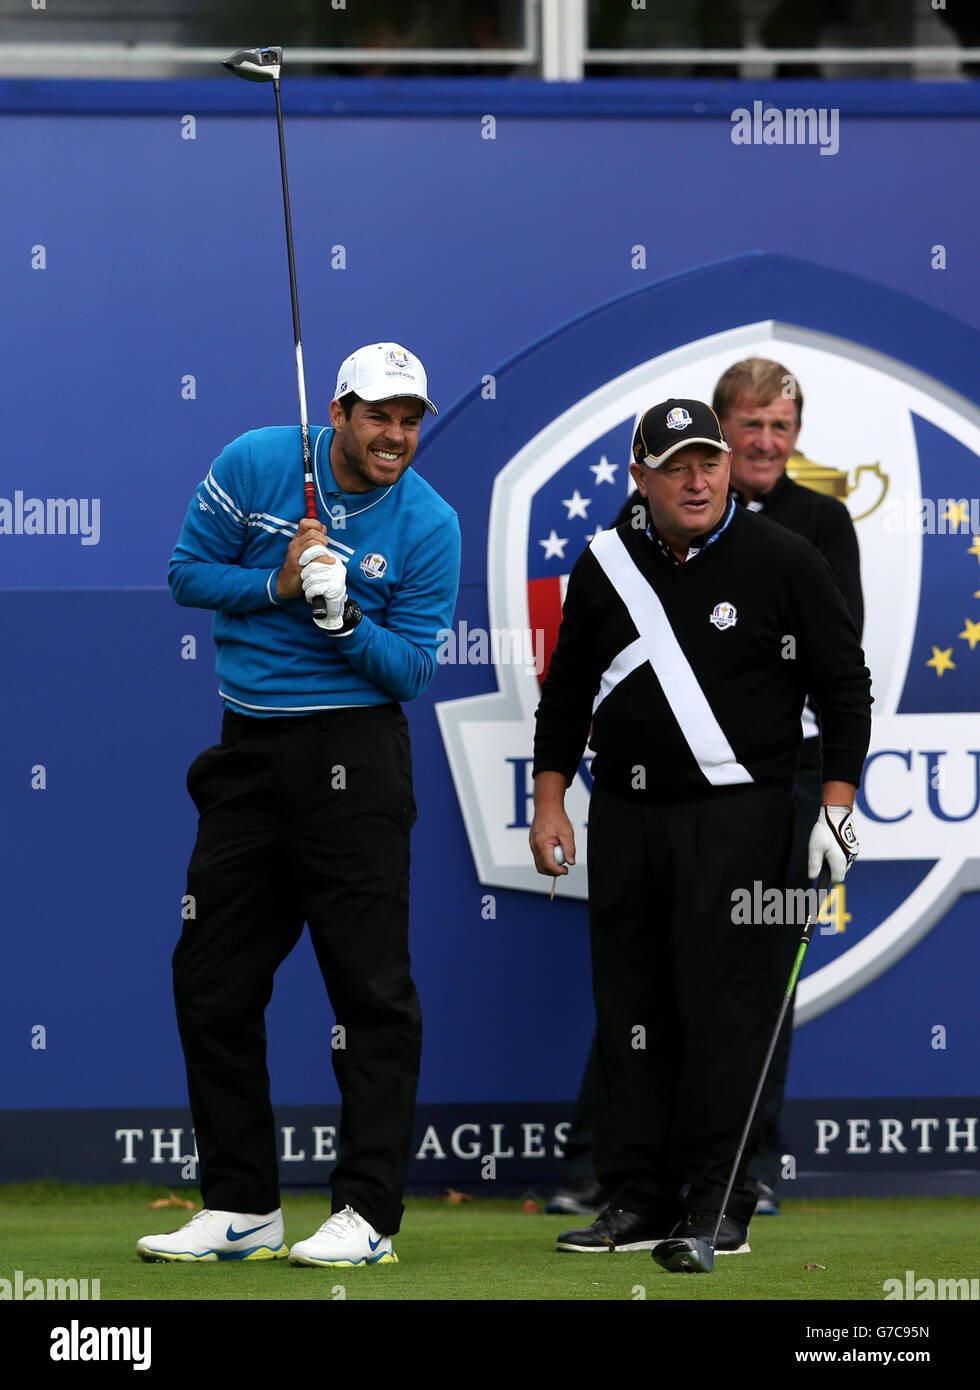 Golf - 40th Ryder Cup - Practice Day Three - Gleneagles Stock Photo